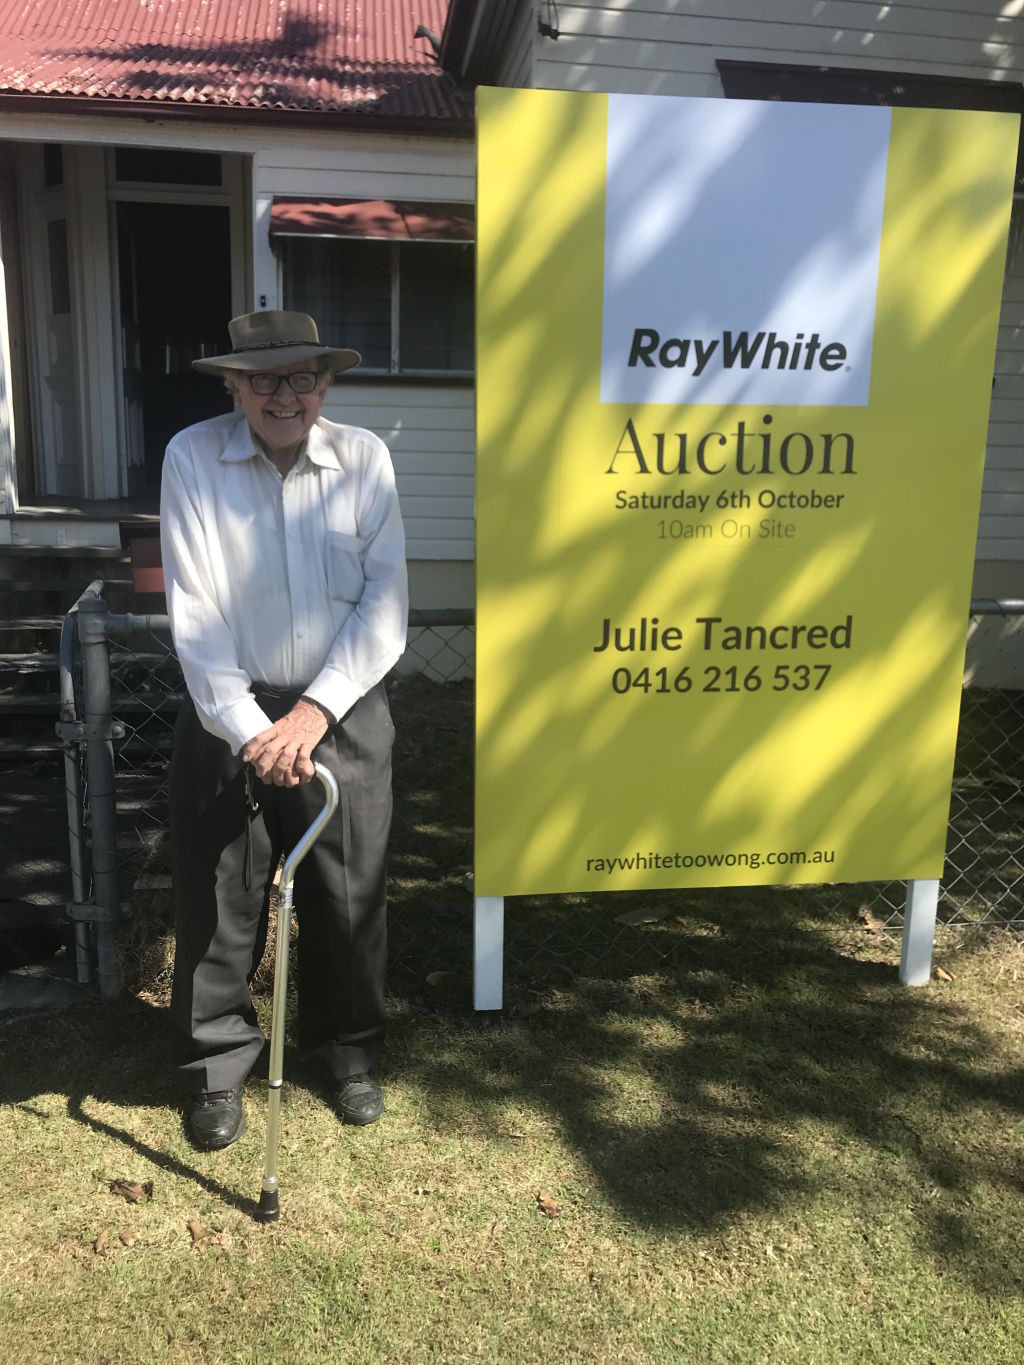 Brisbane auctions: What it's like to sell your home at the age of 83